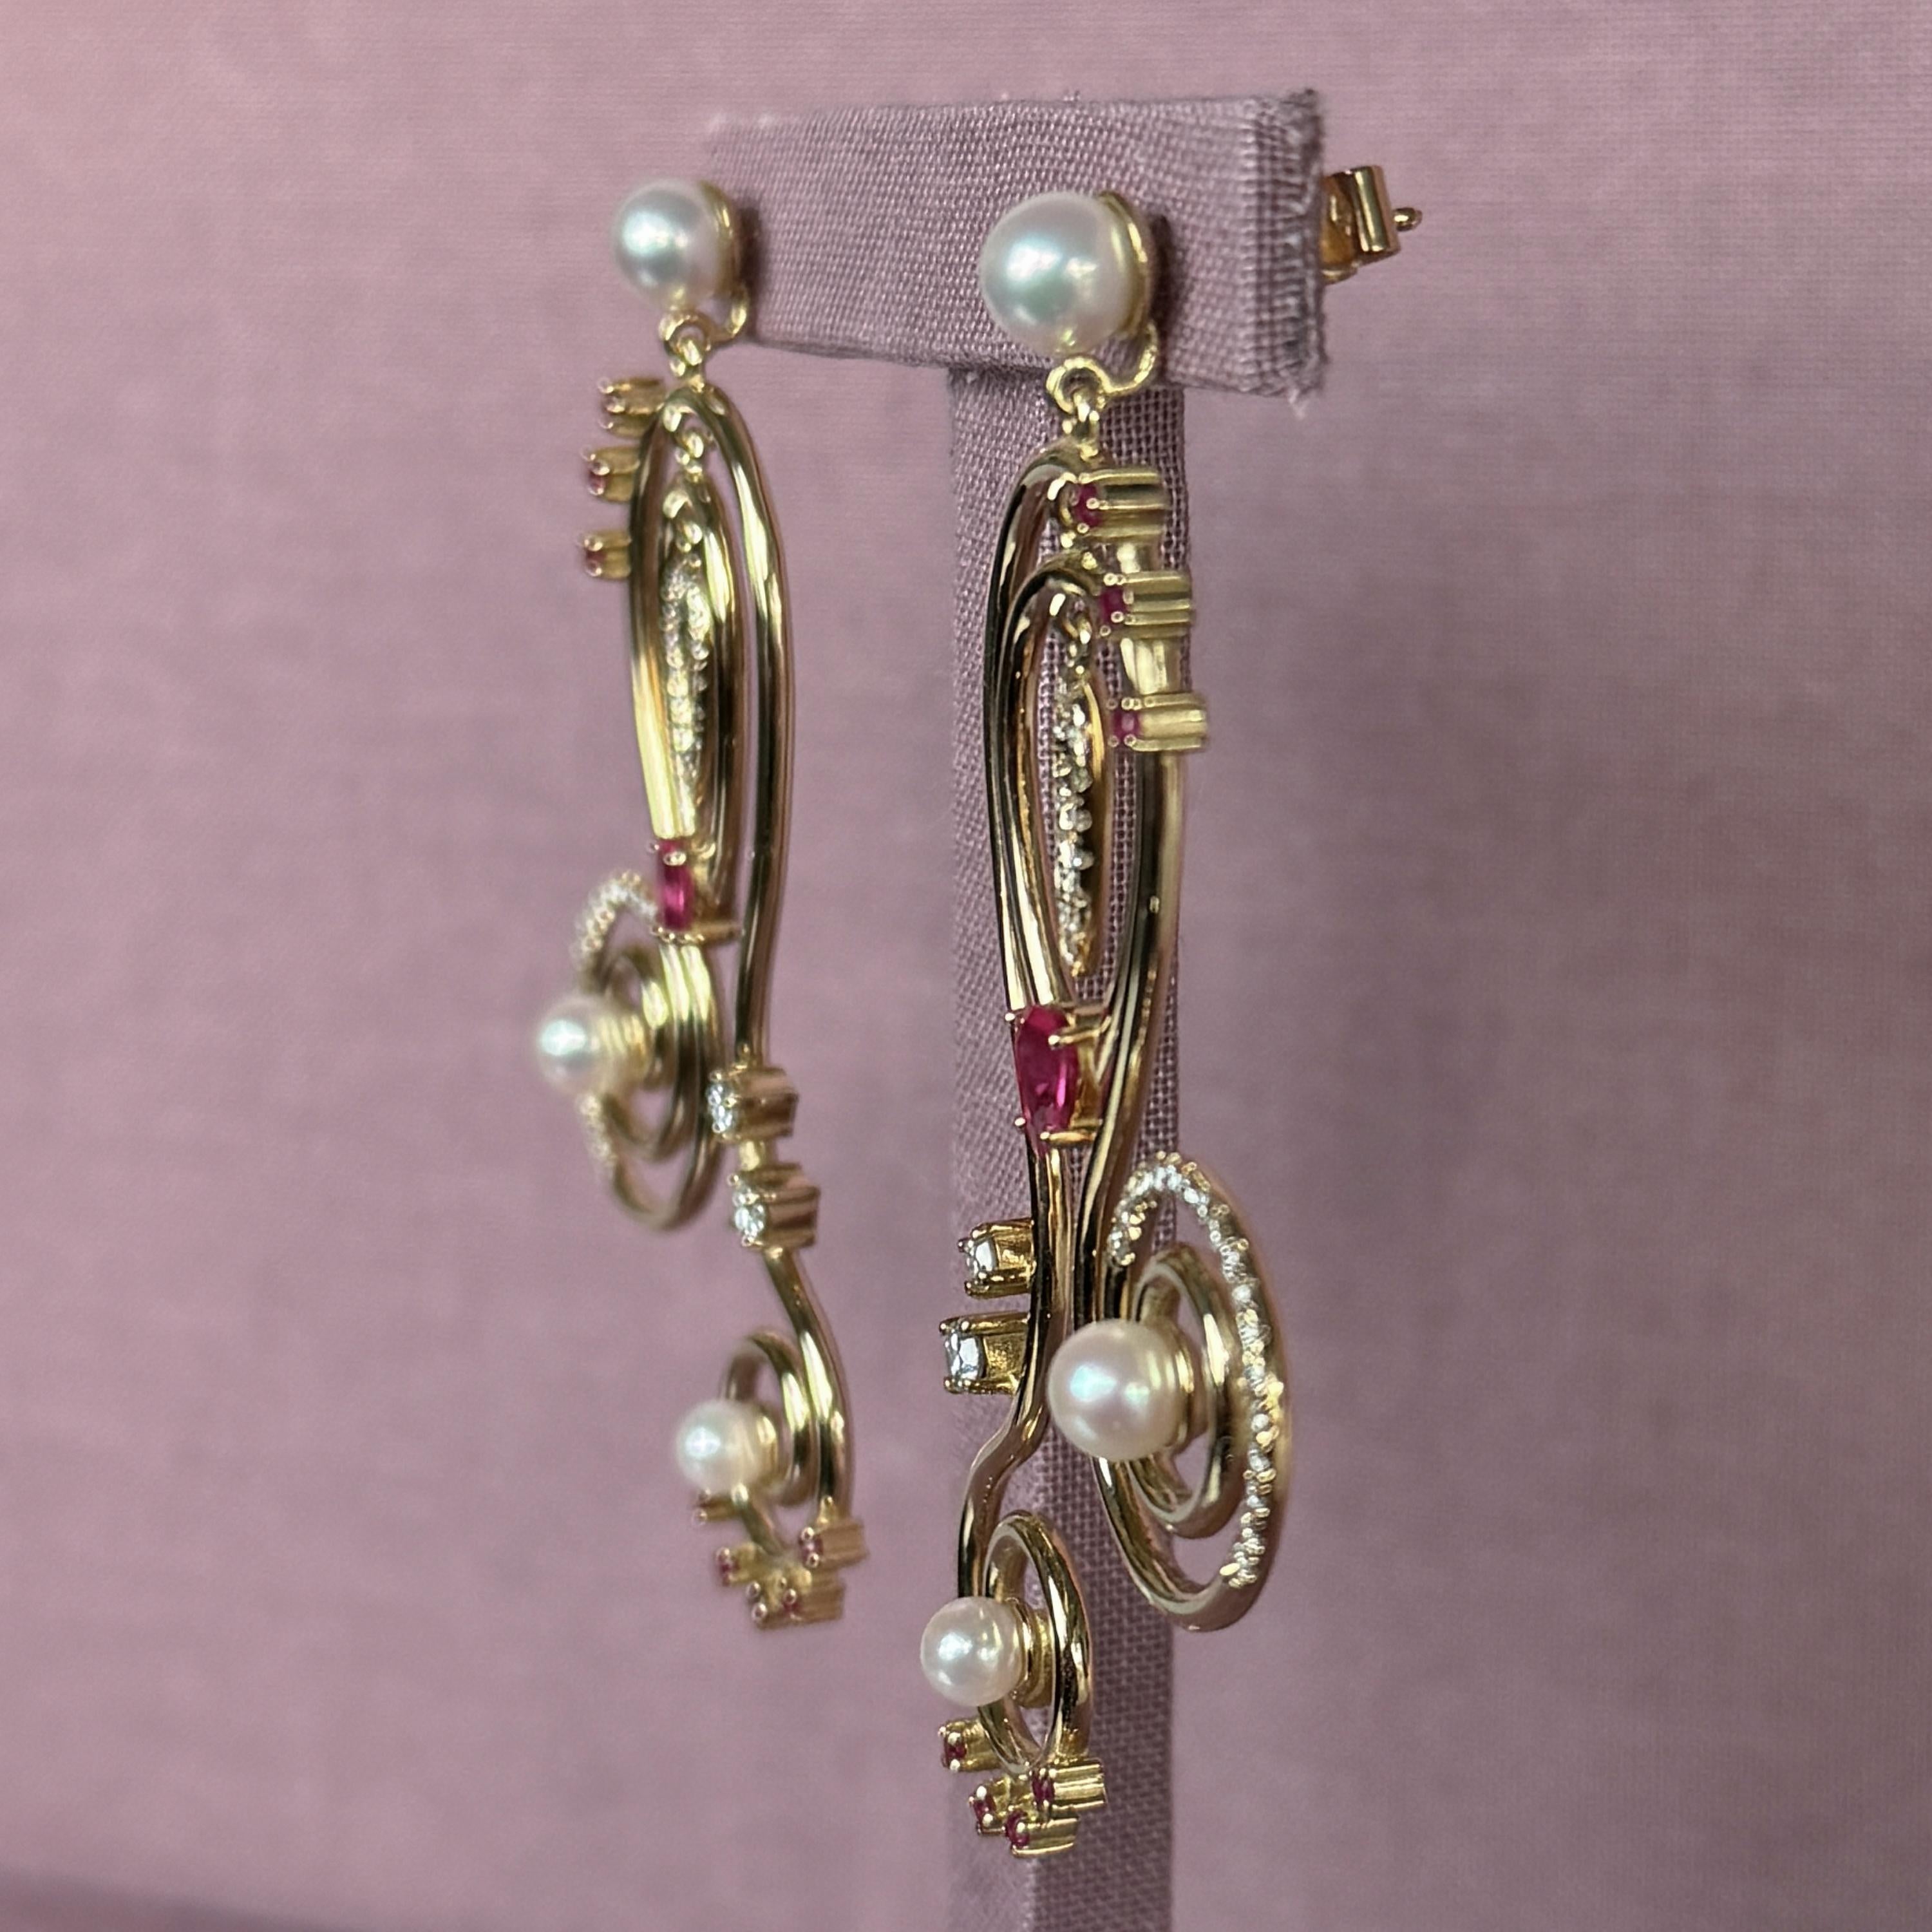 Pear Cut Serenity Earrings in 18 Karat Yellow Gold with Diamonds, Rubies And Pearls